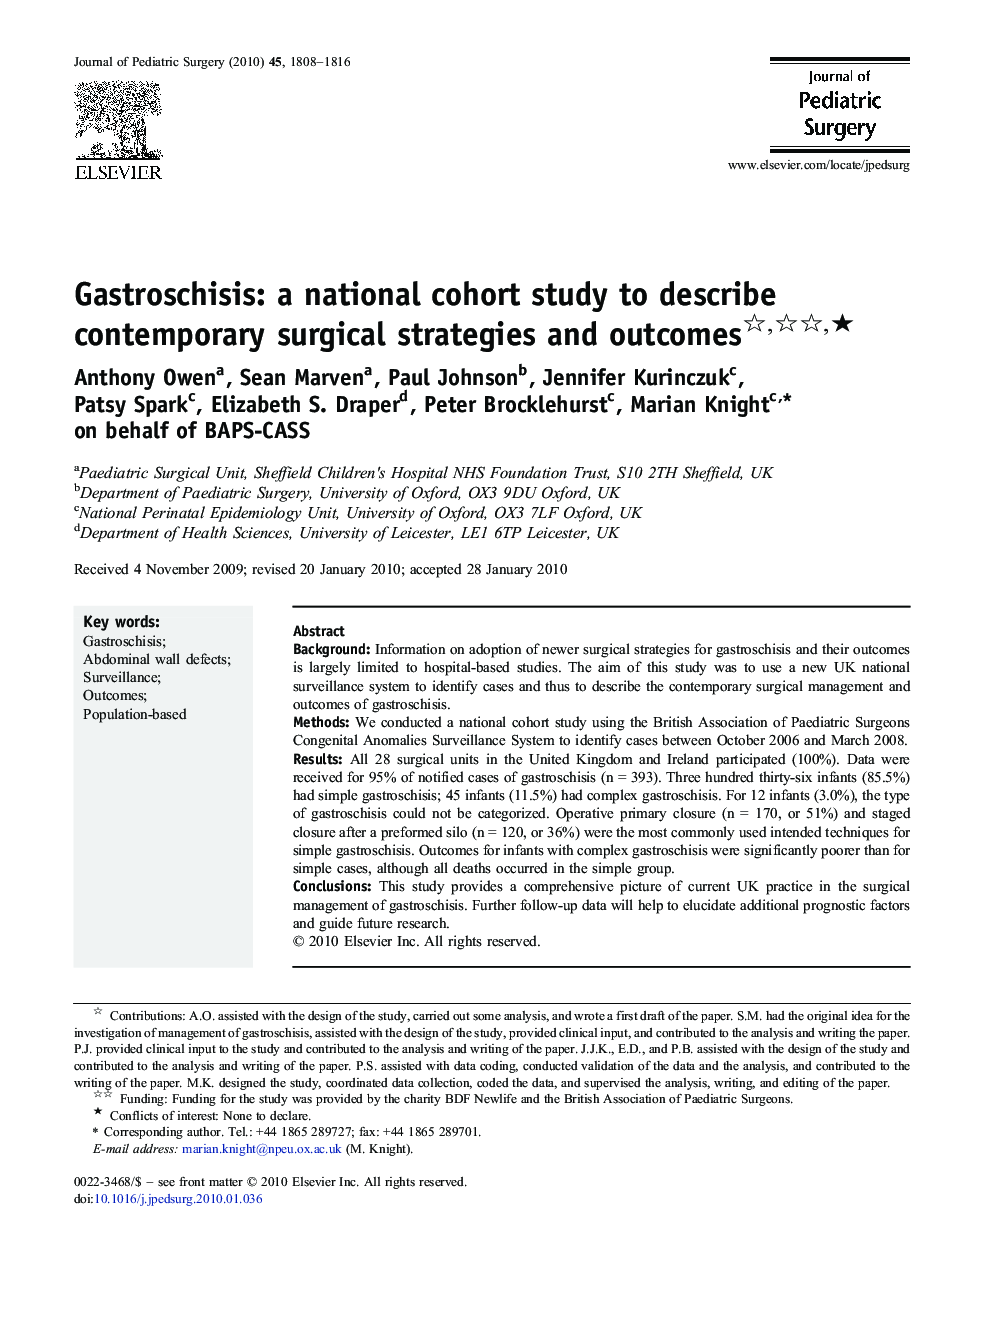 Gastroschisis: a national cohort study to describe contemporary surgical strategies and outcomes ★